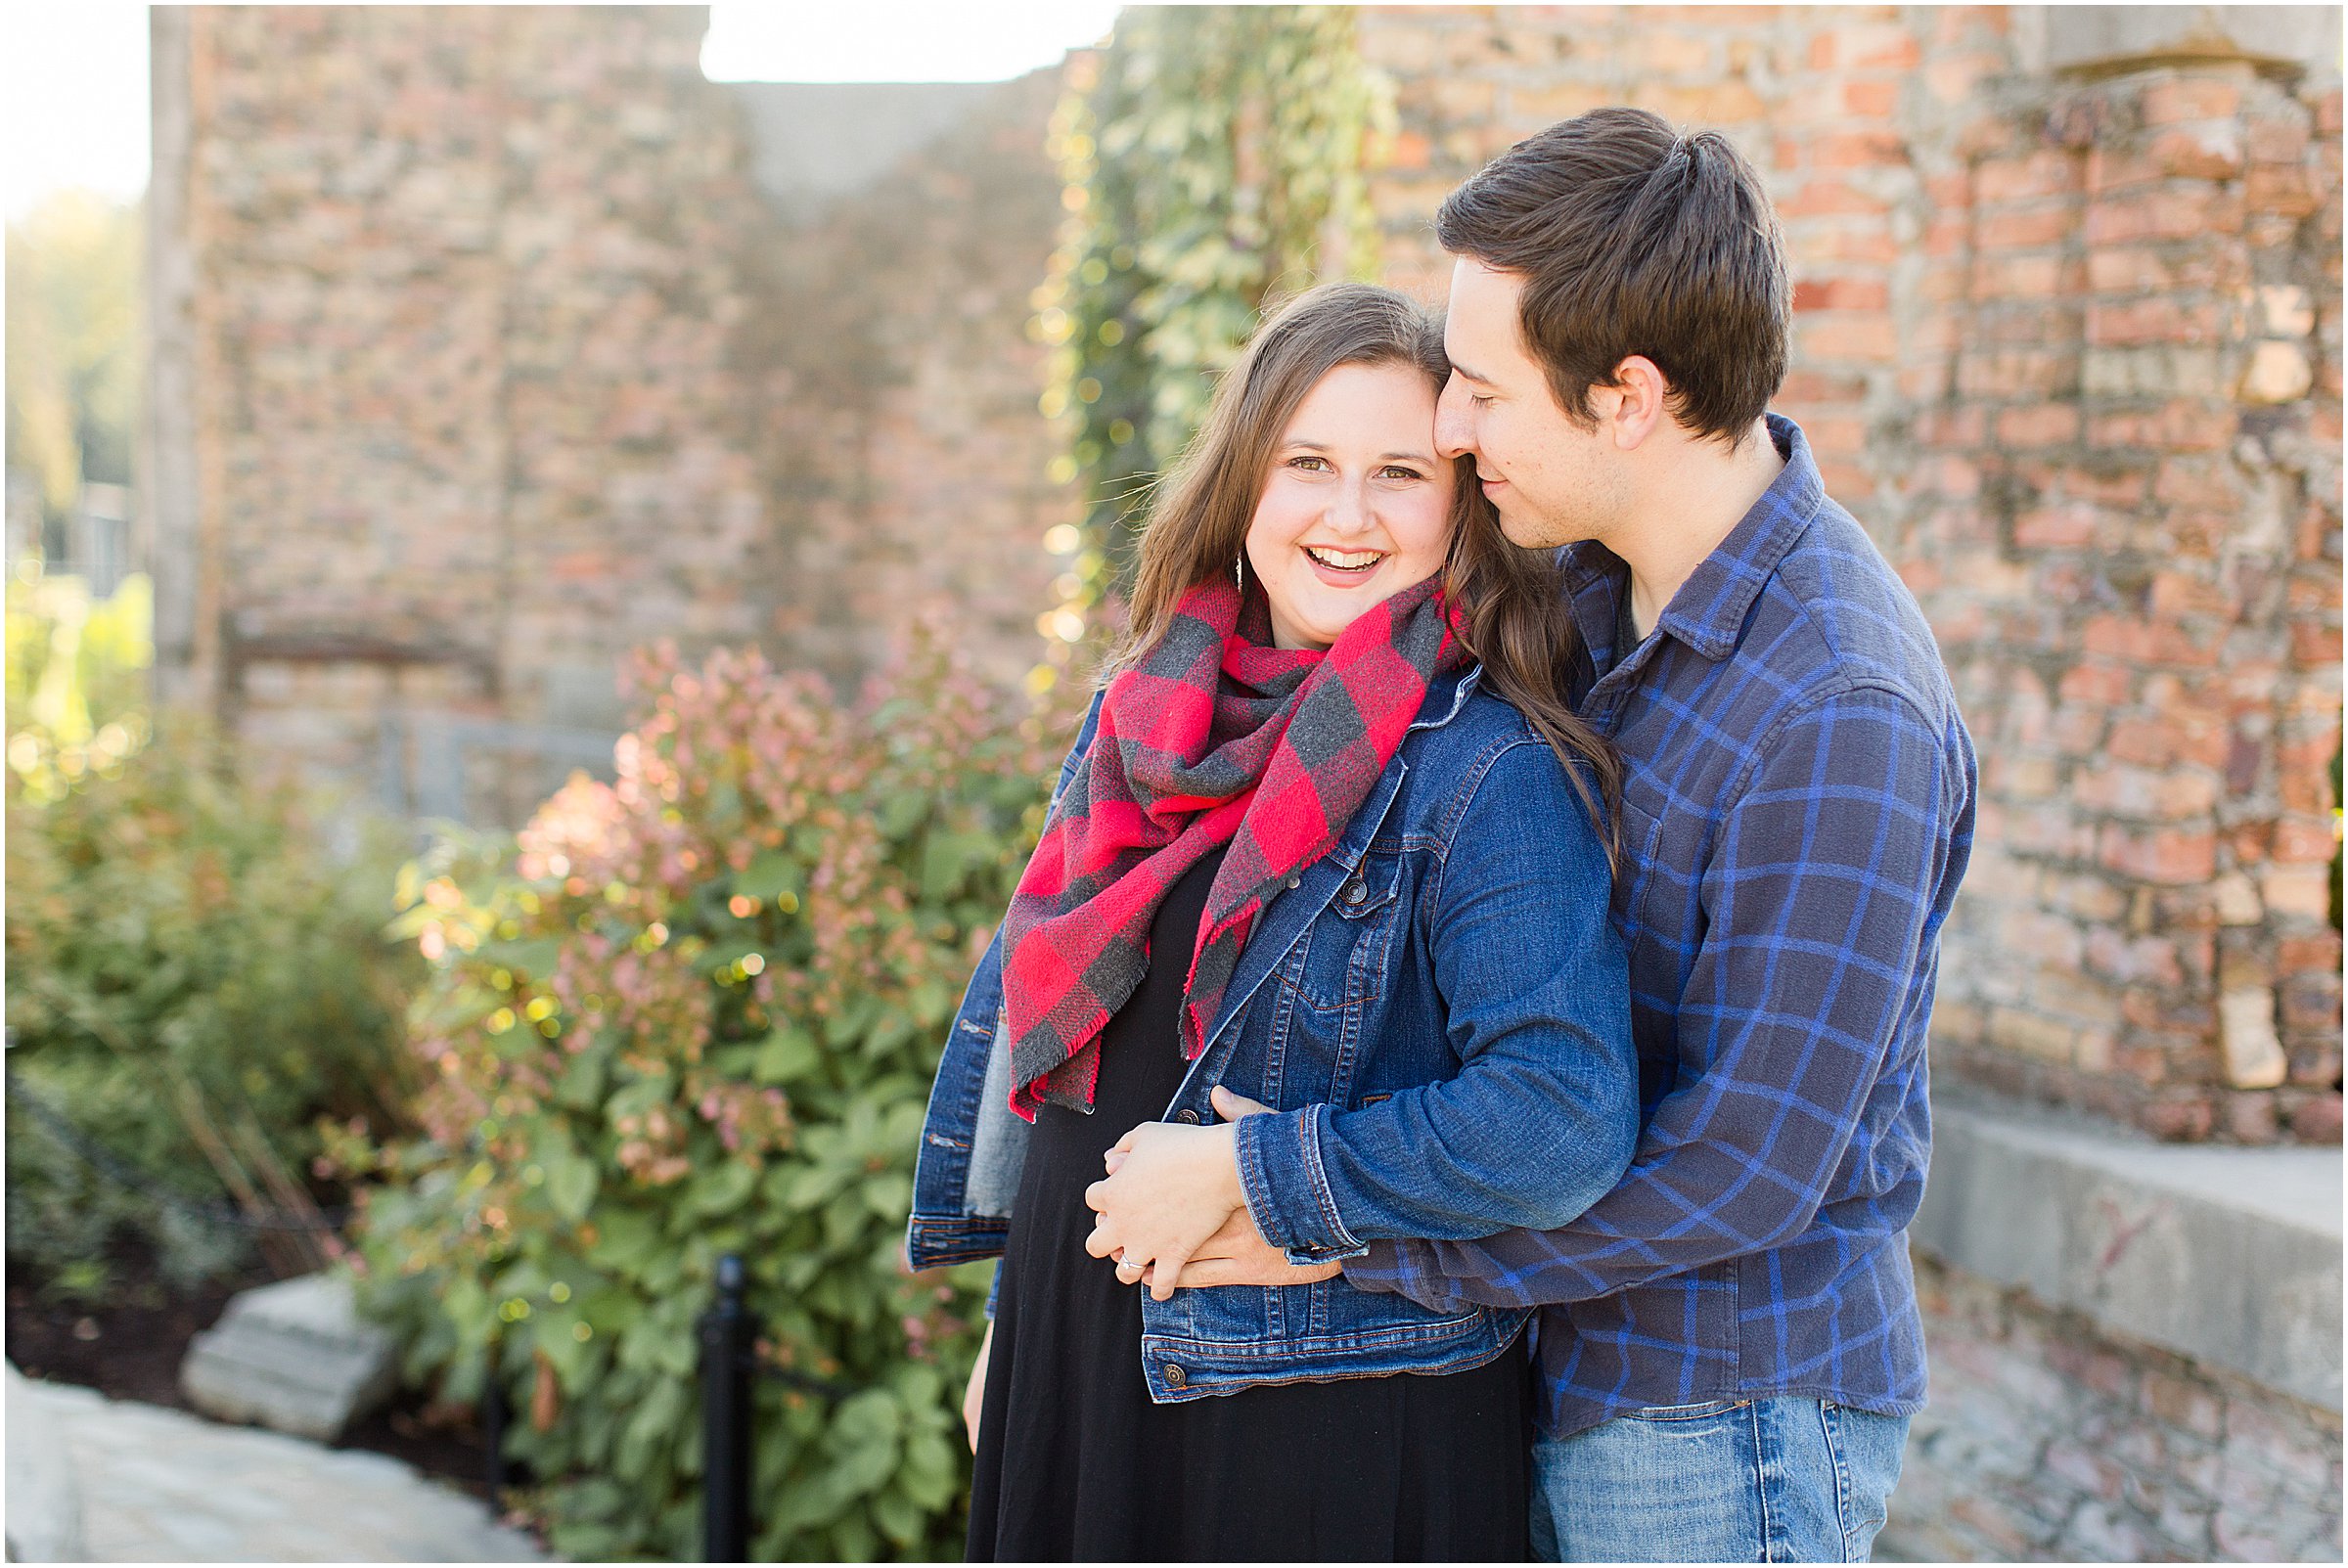 Holliday Park Engagement Session by Sami Renee_0011.jpg